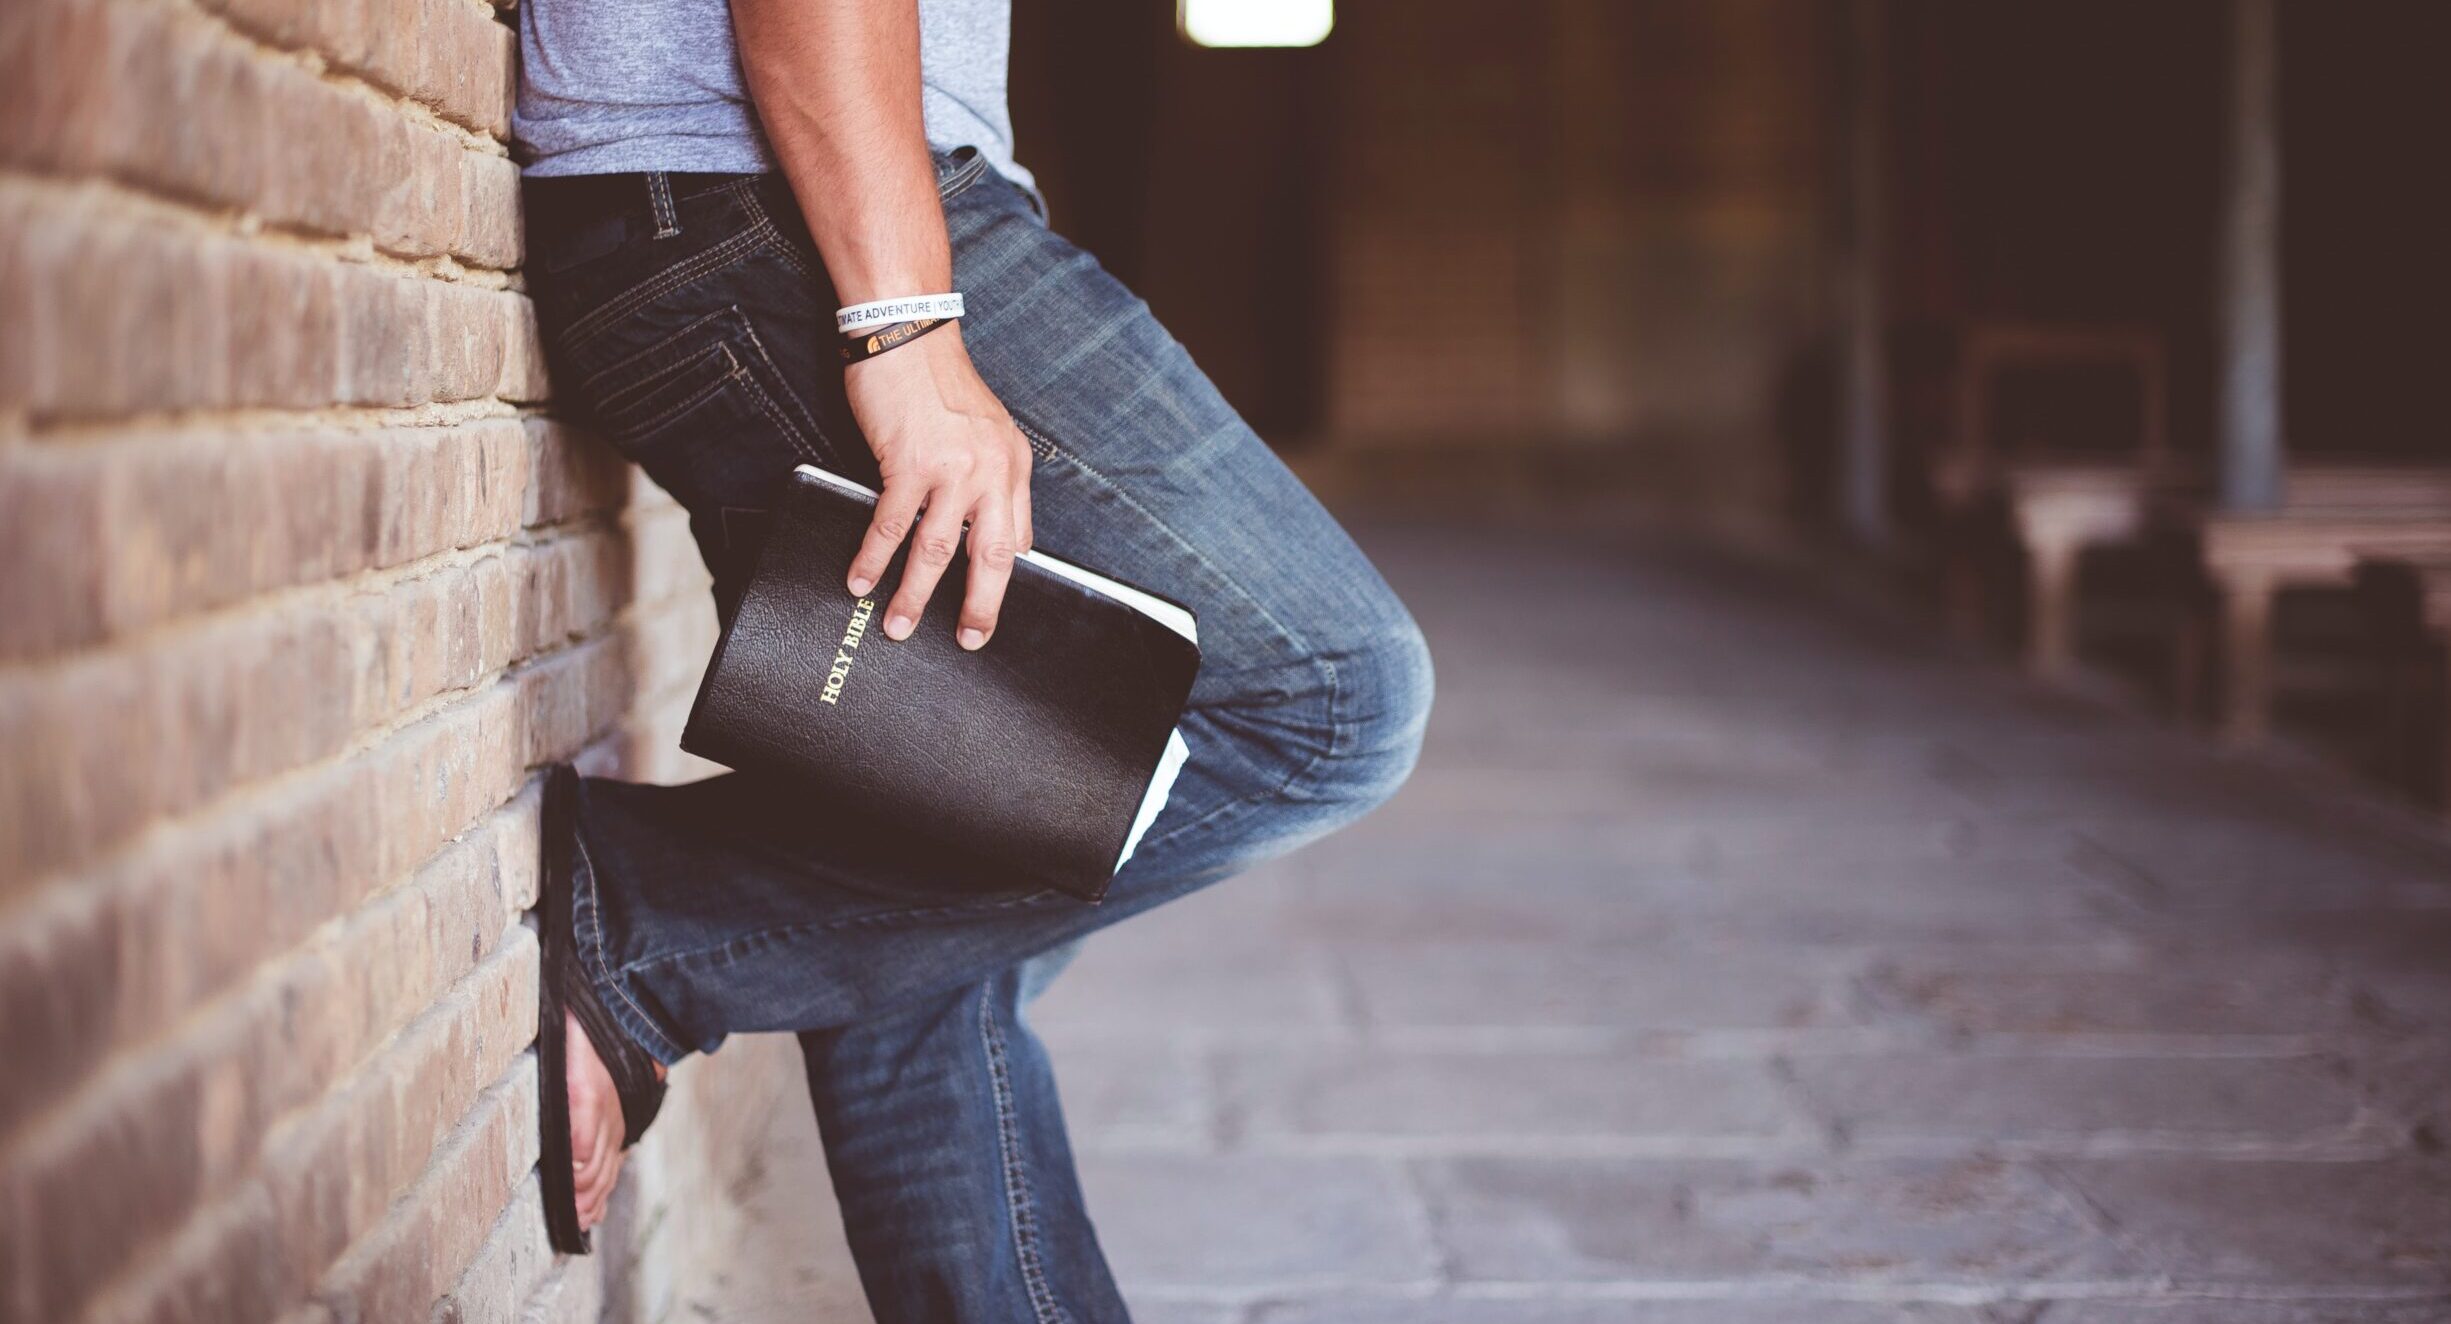 Man leaning against brick wall while holding a Bible